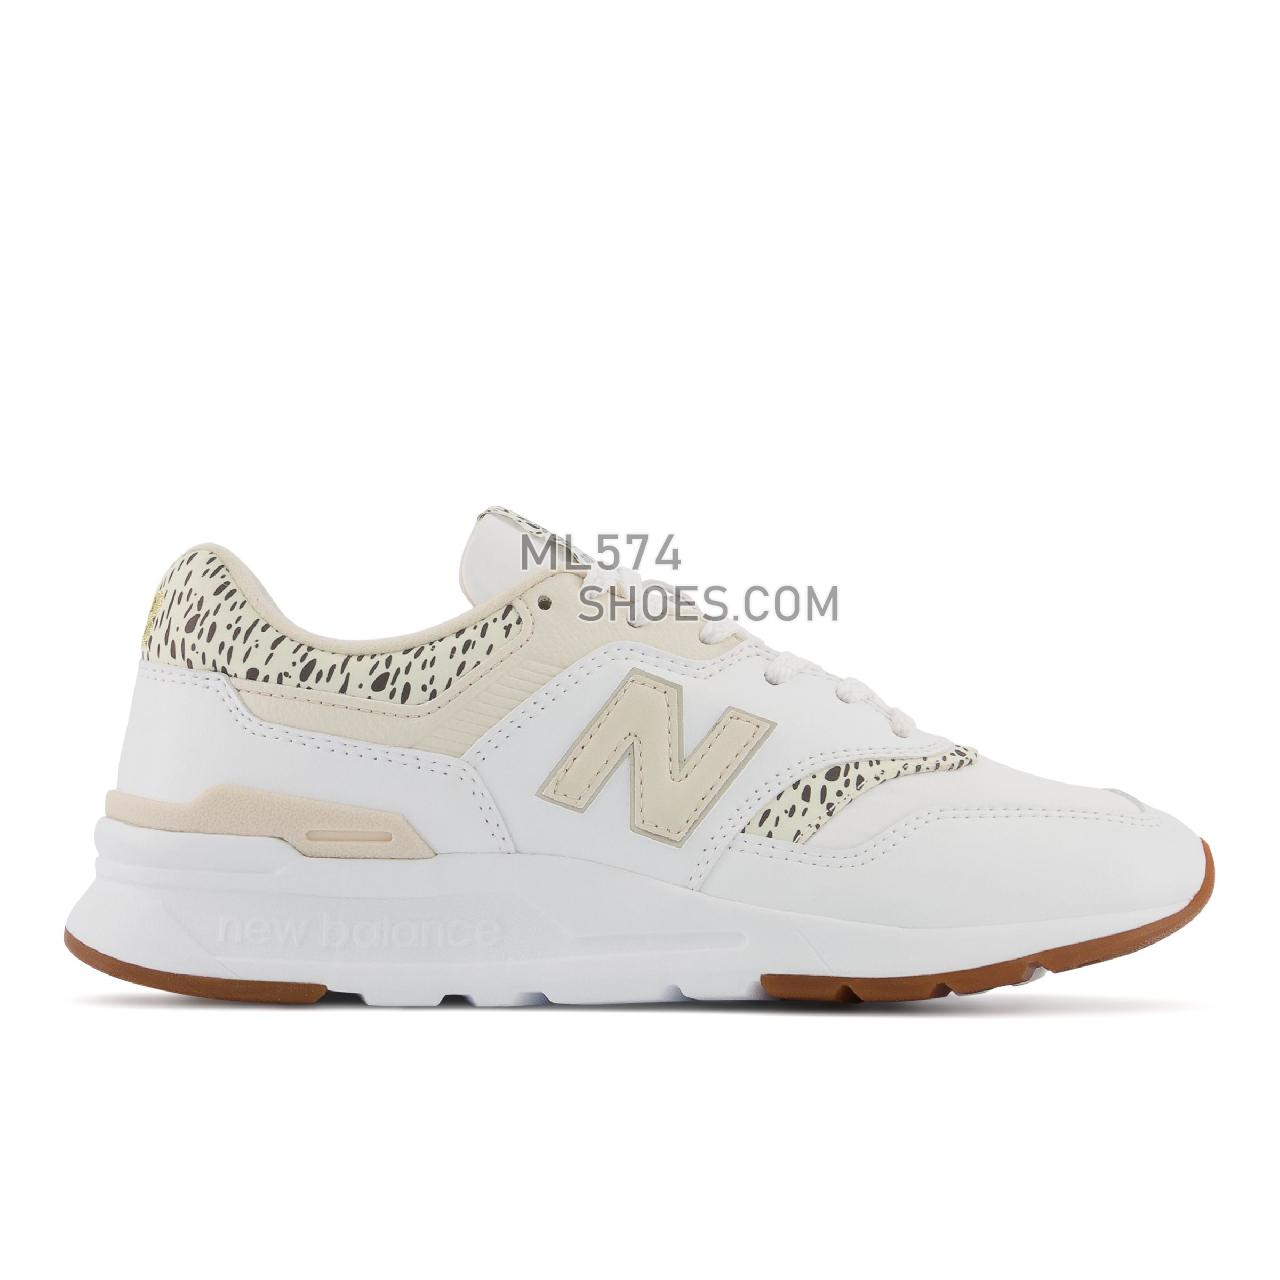 New Balance 997H - Women's Classic Sneakers - White with Calm Taupe - CW997HPI